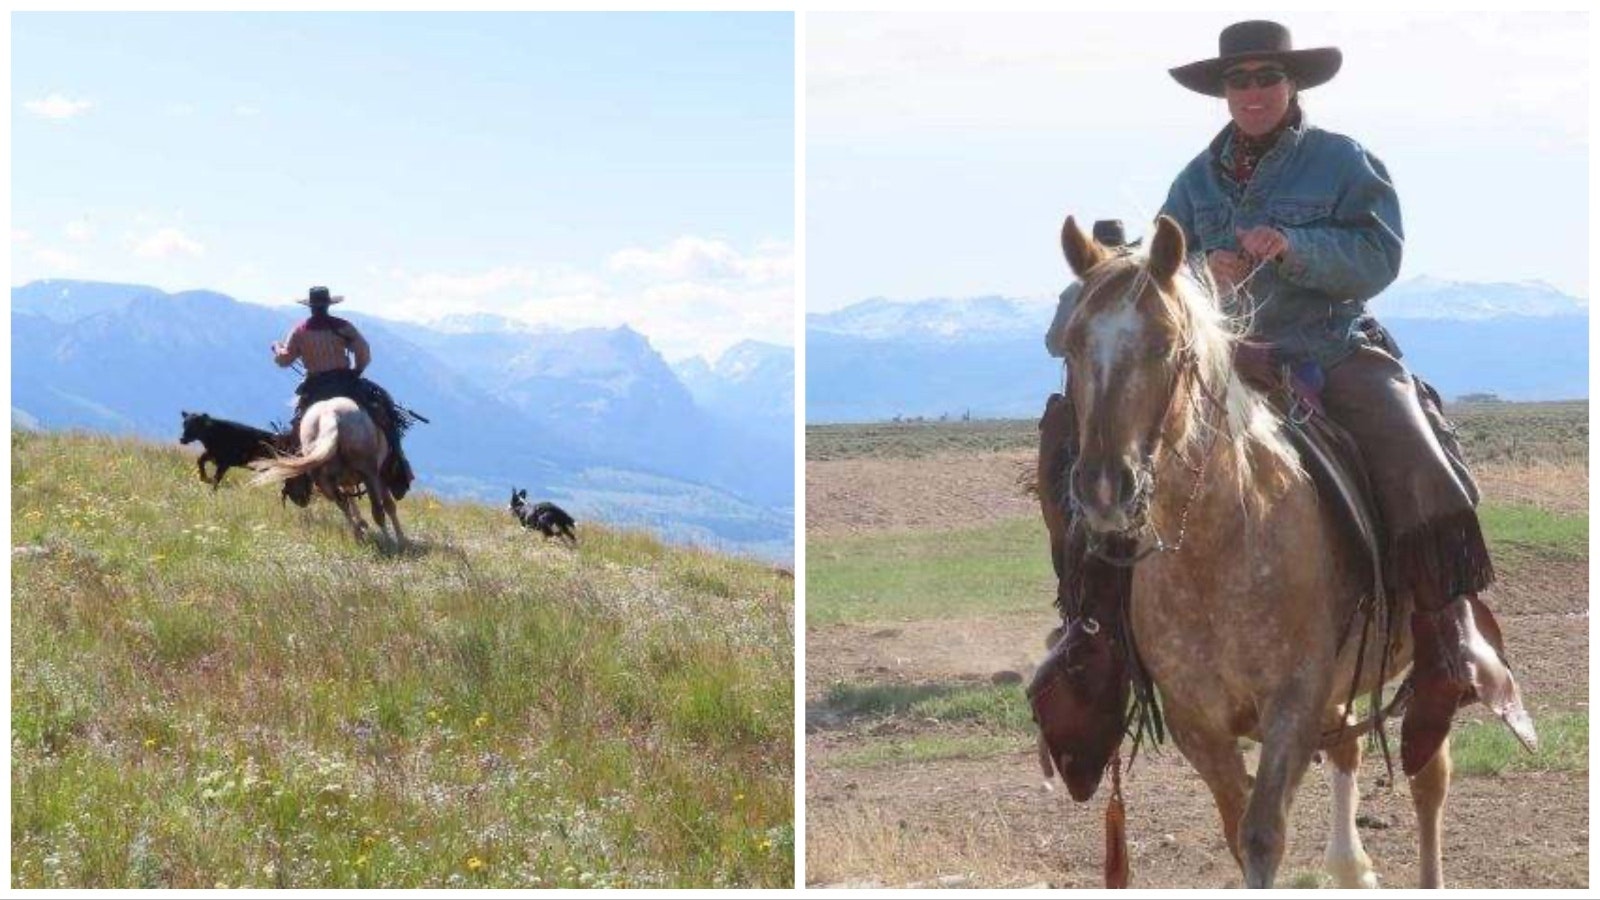 Brittany Heseltine doing what she does best — riding the Wyoming range.